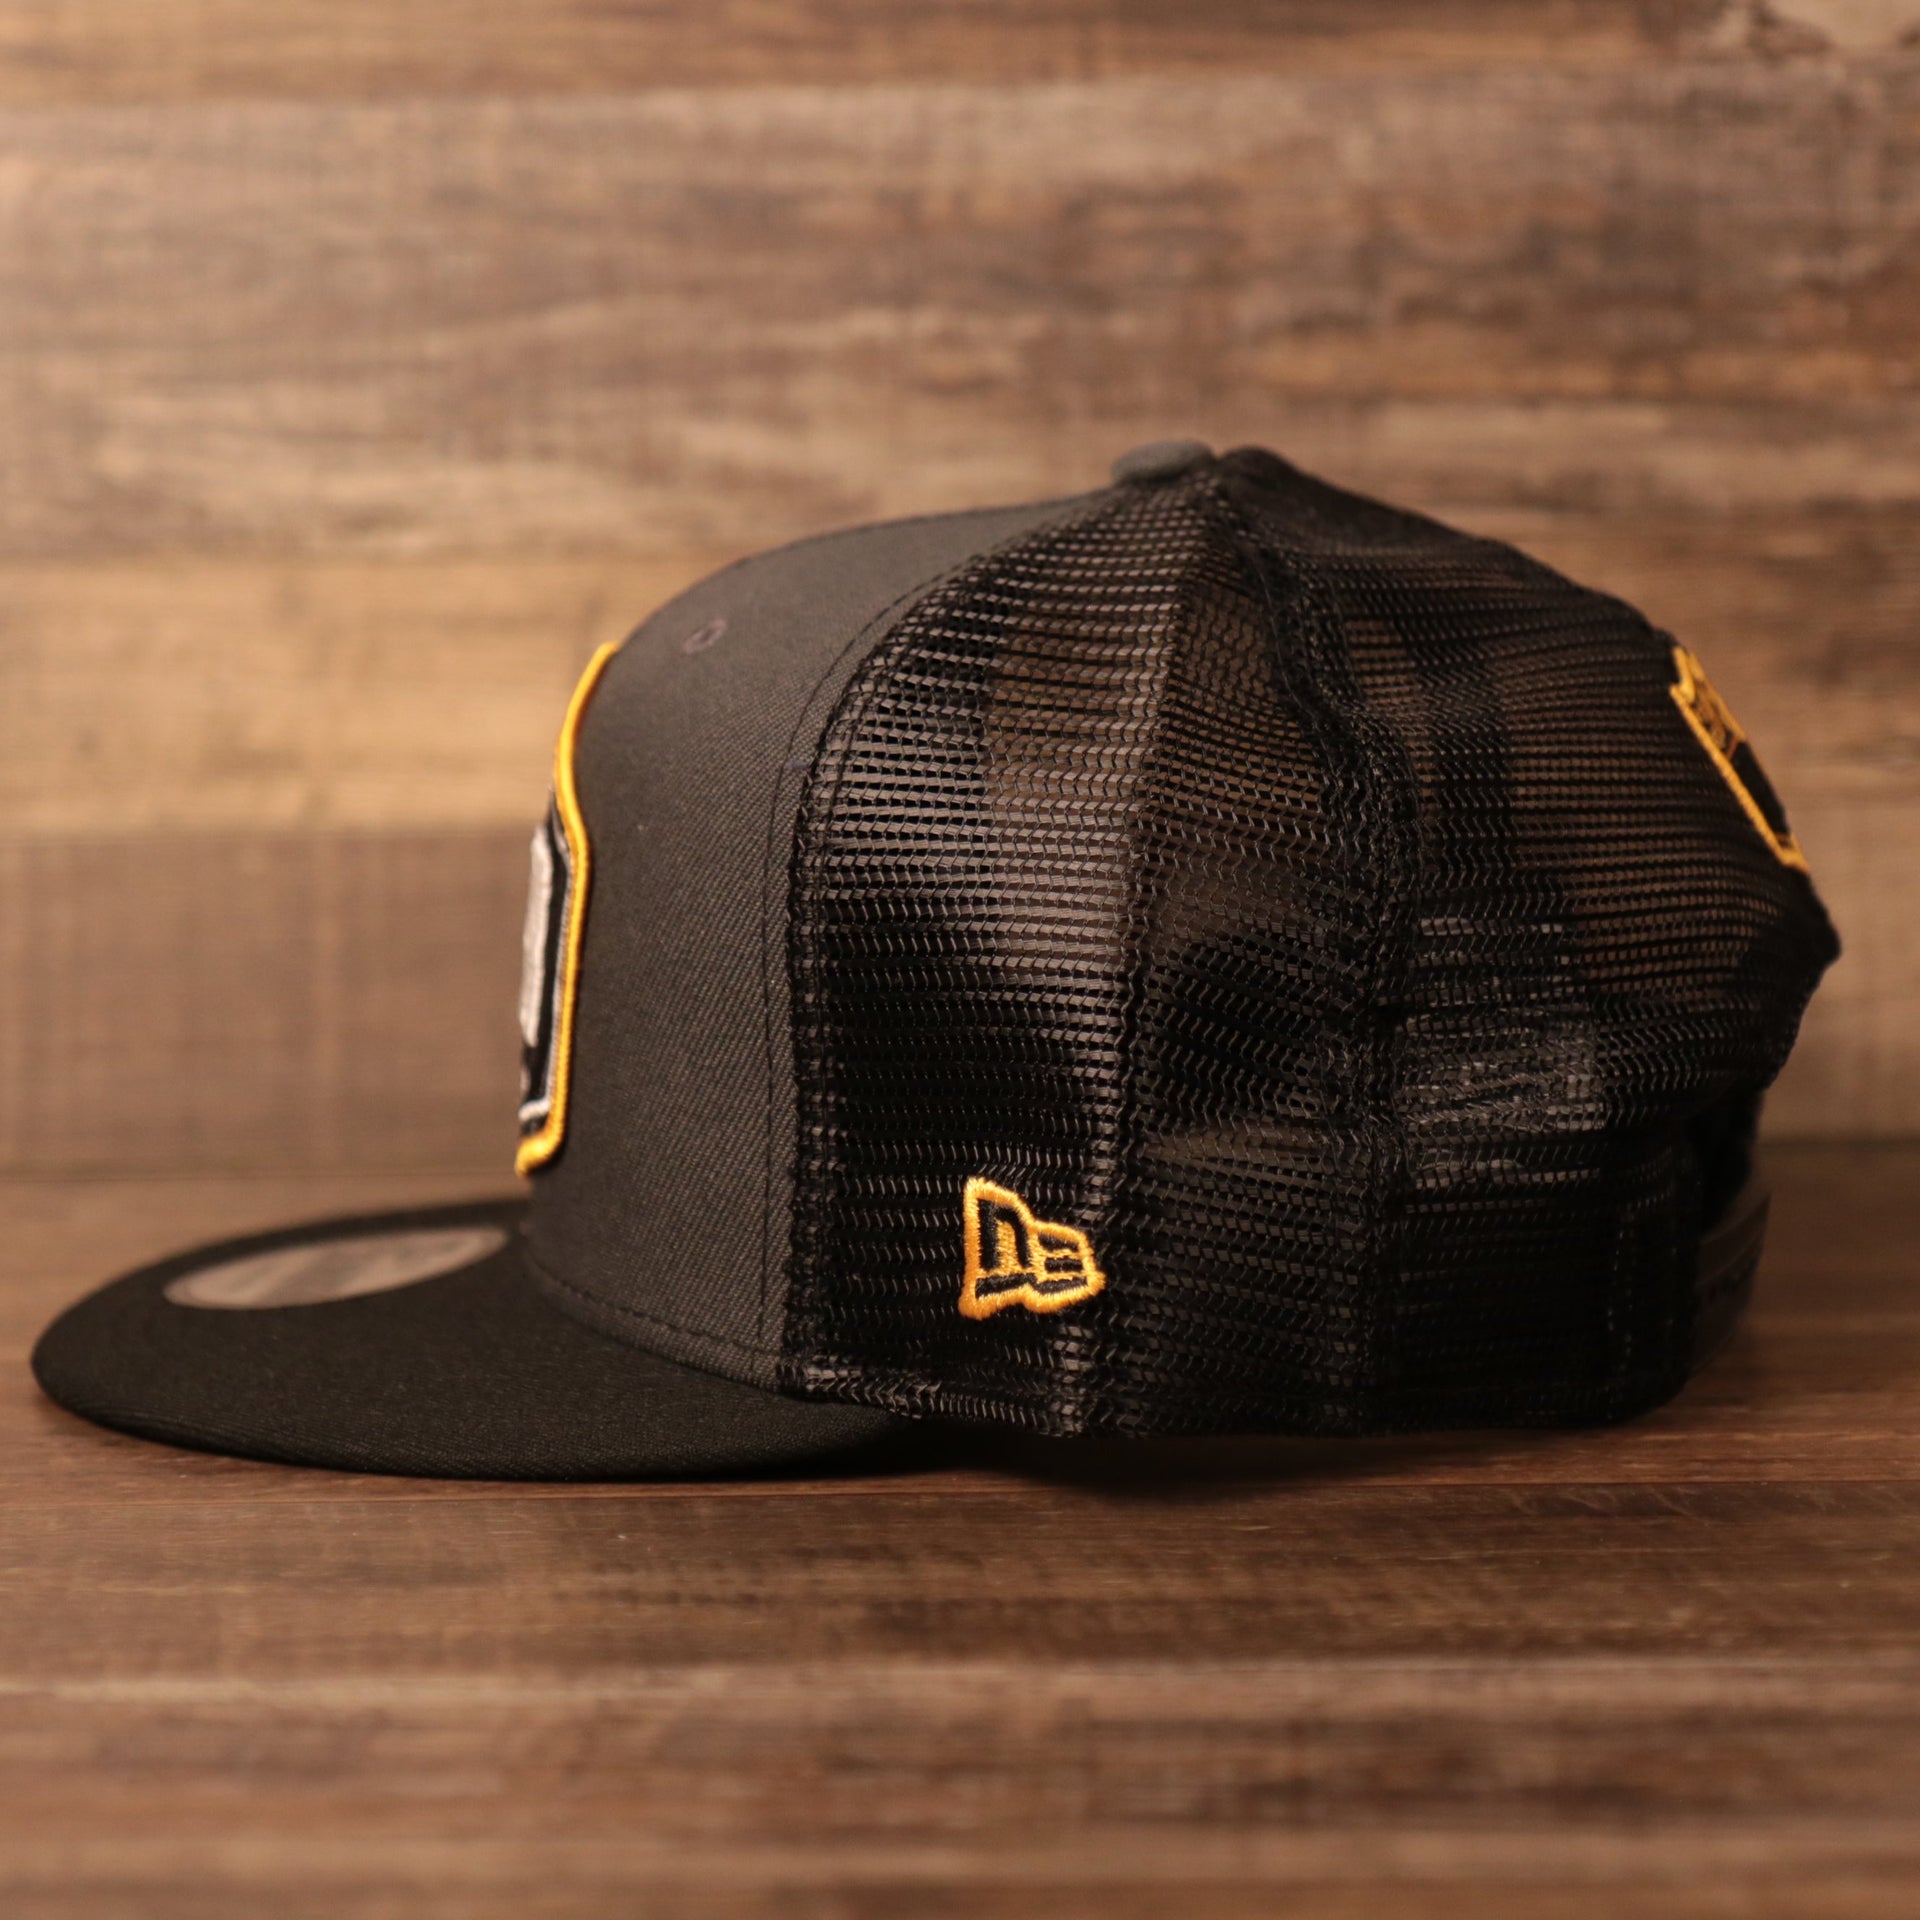 The meshback adjustable trucker hat for the Steel City 2021 NFL Draft from the wearer's left side.